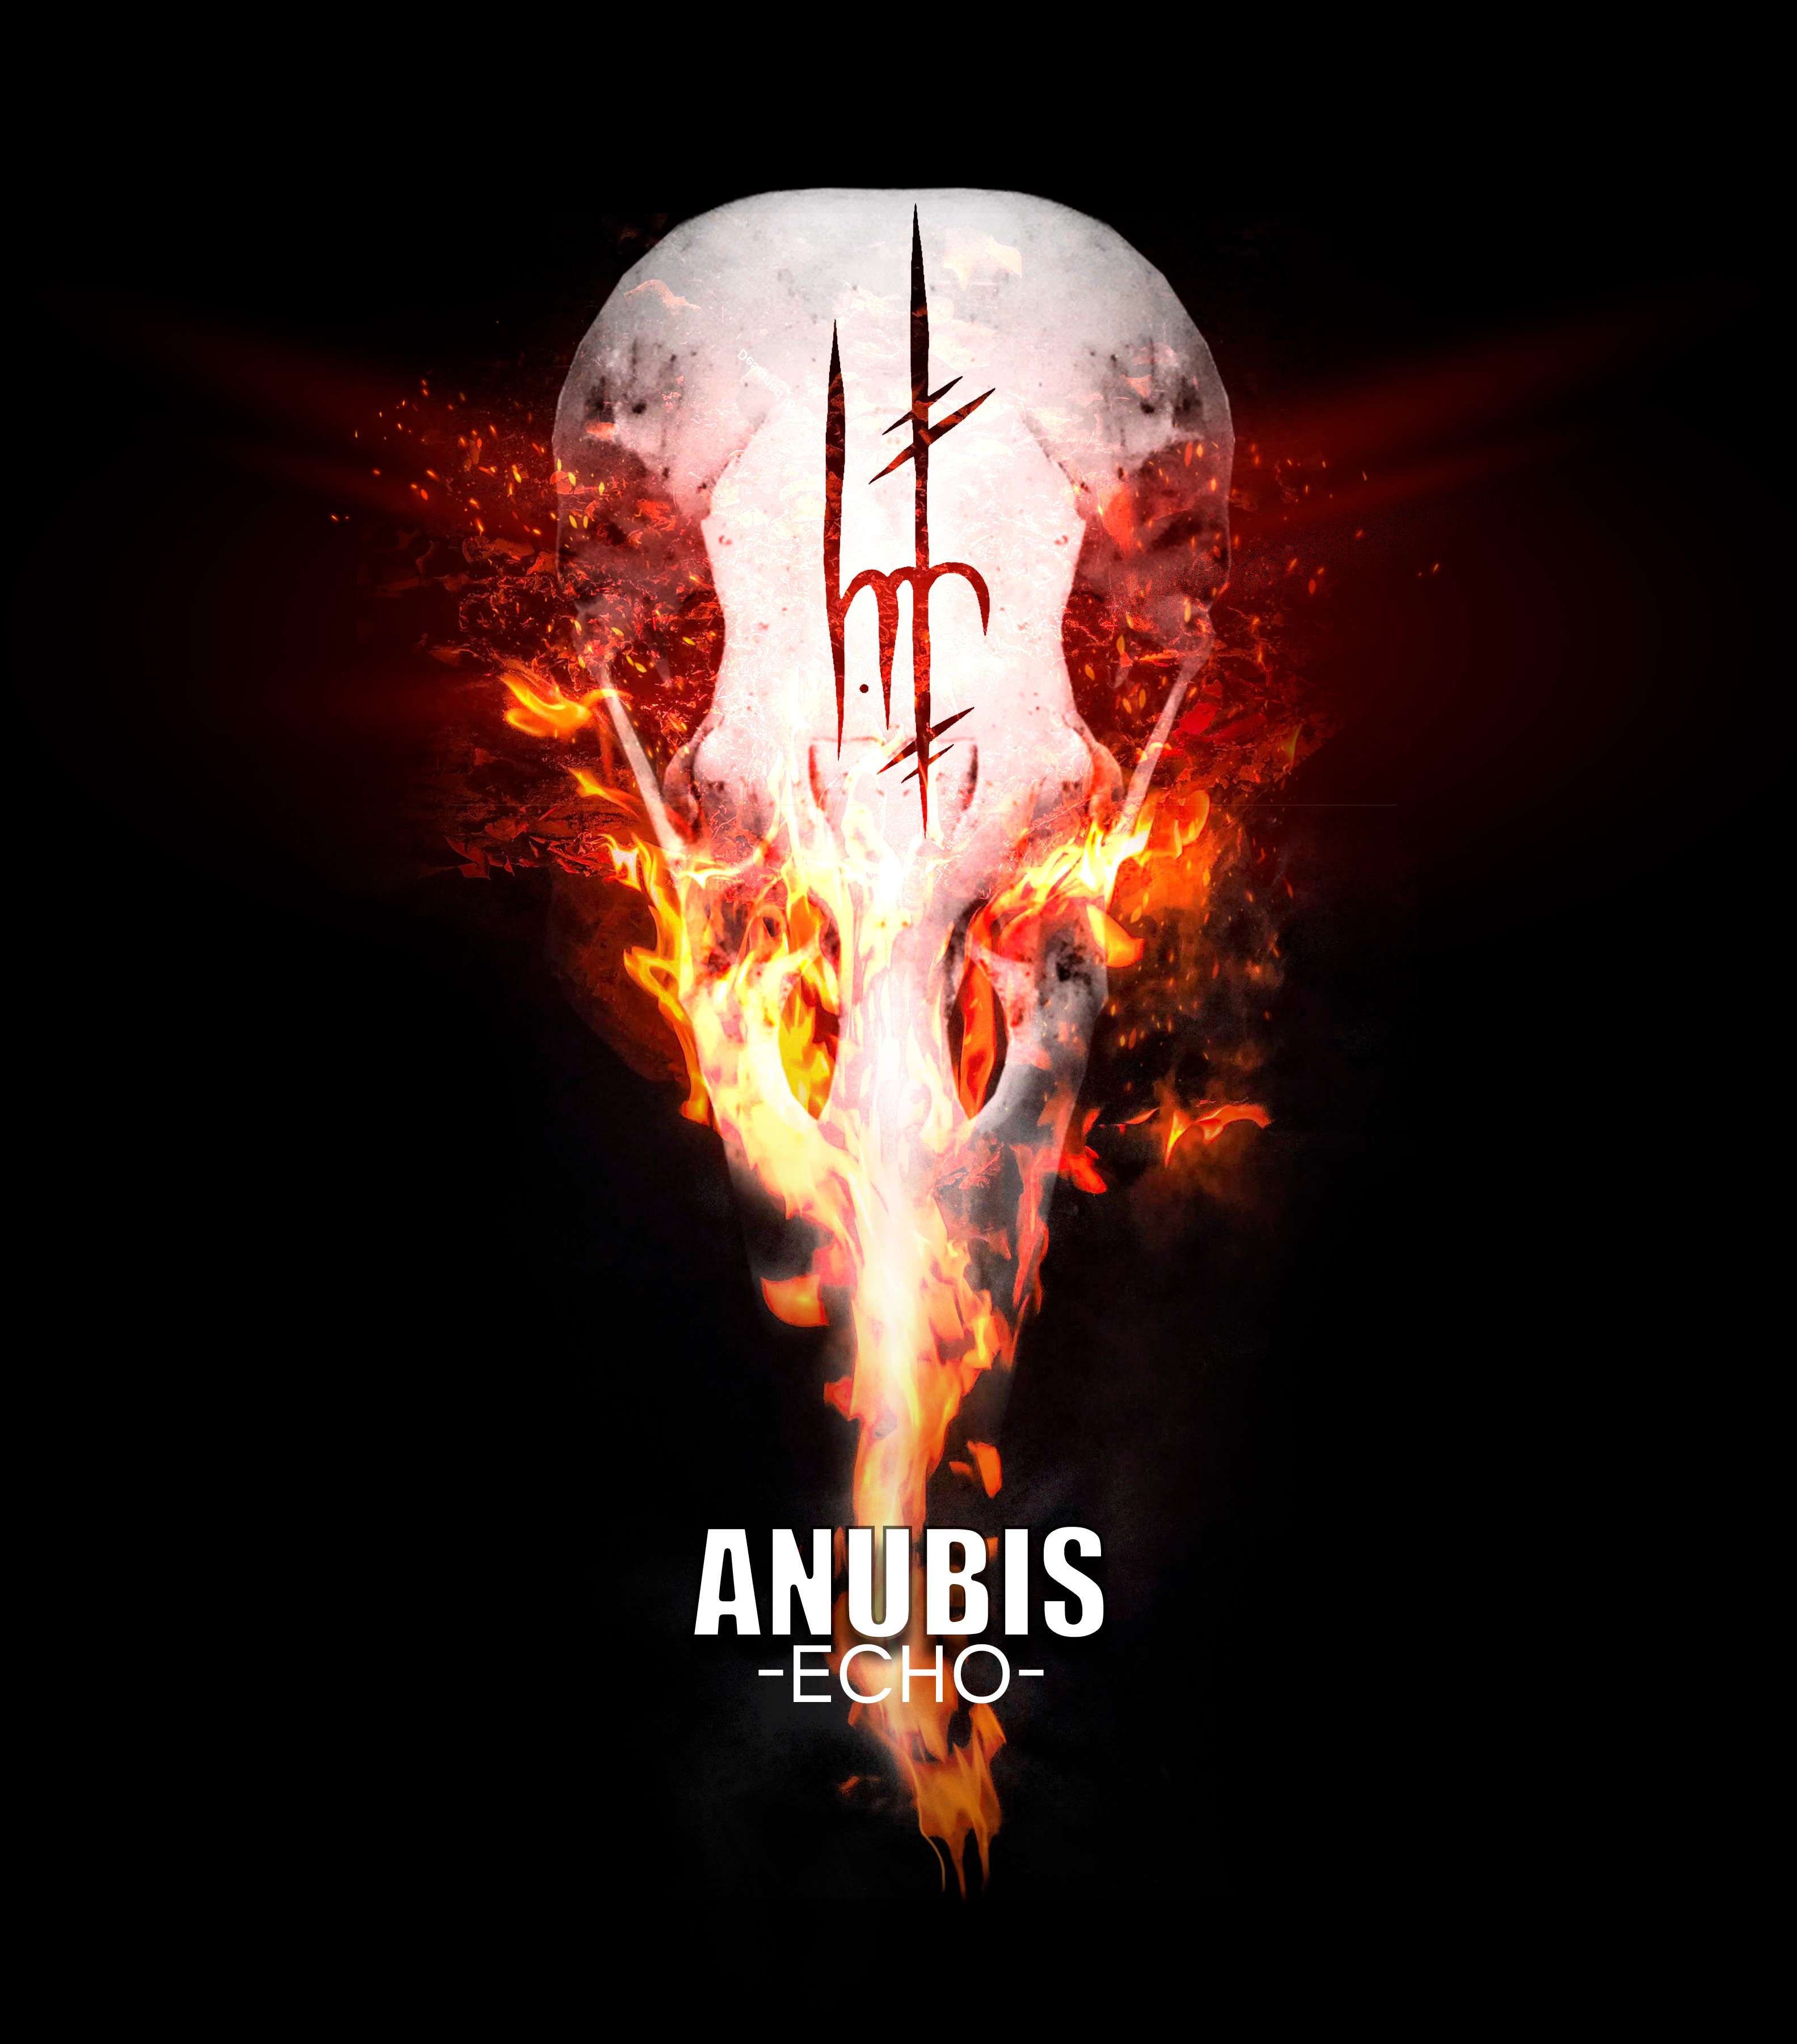 Anubis Echo - Out now